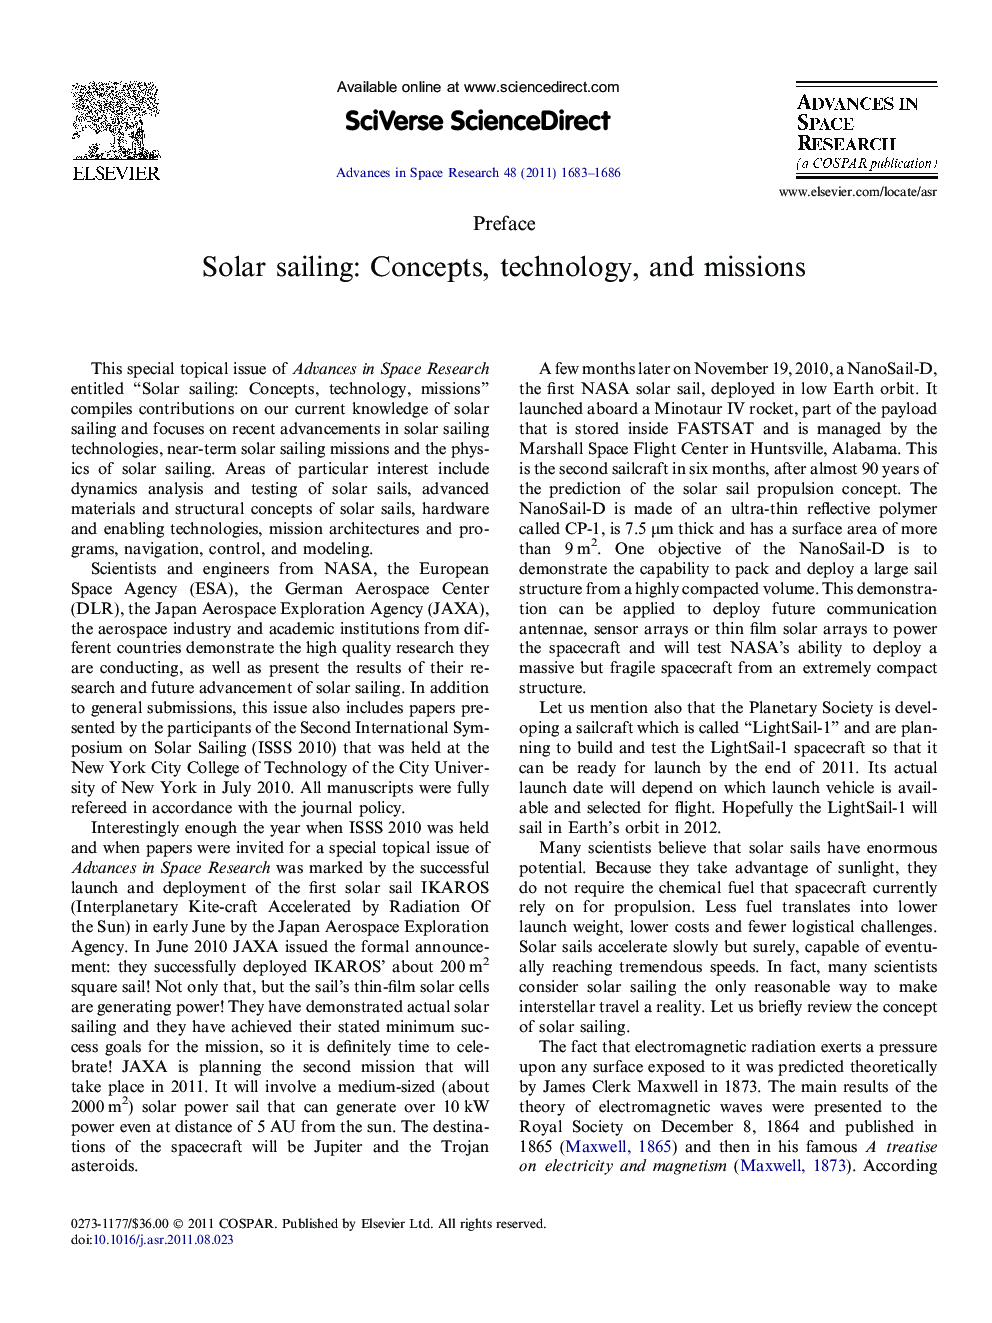 Preface. Solar sailing: Concepts, technology, and missions